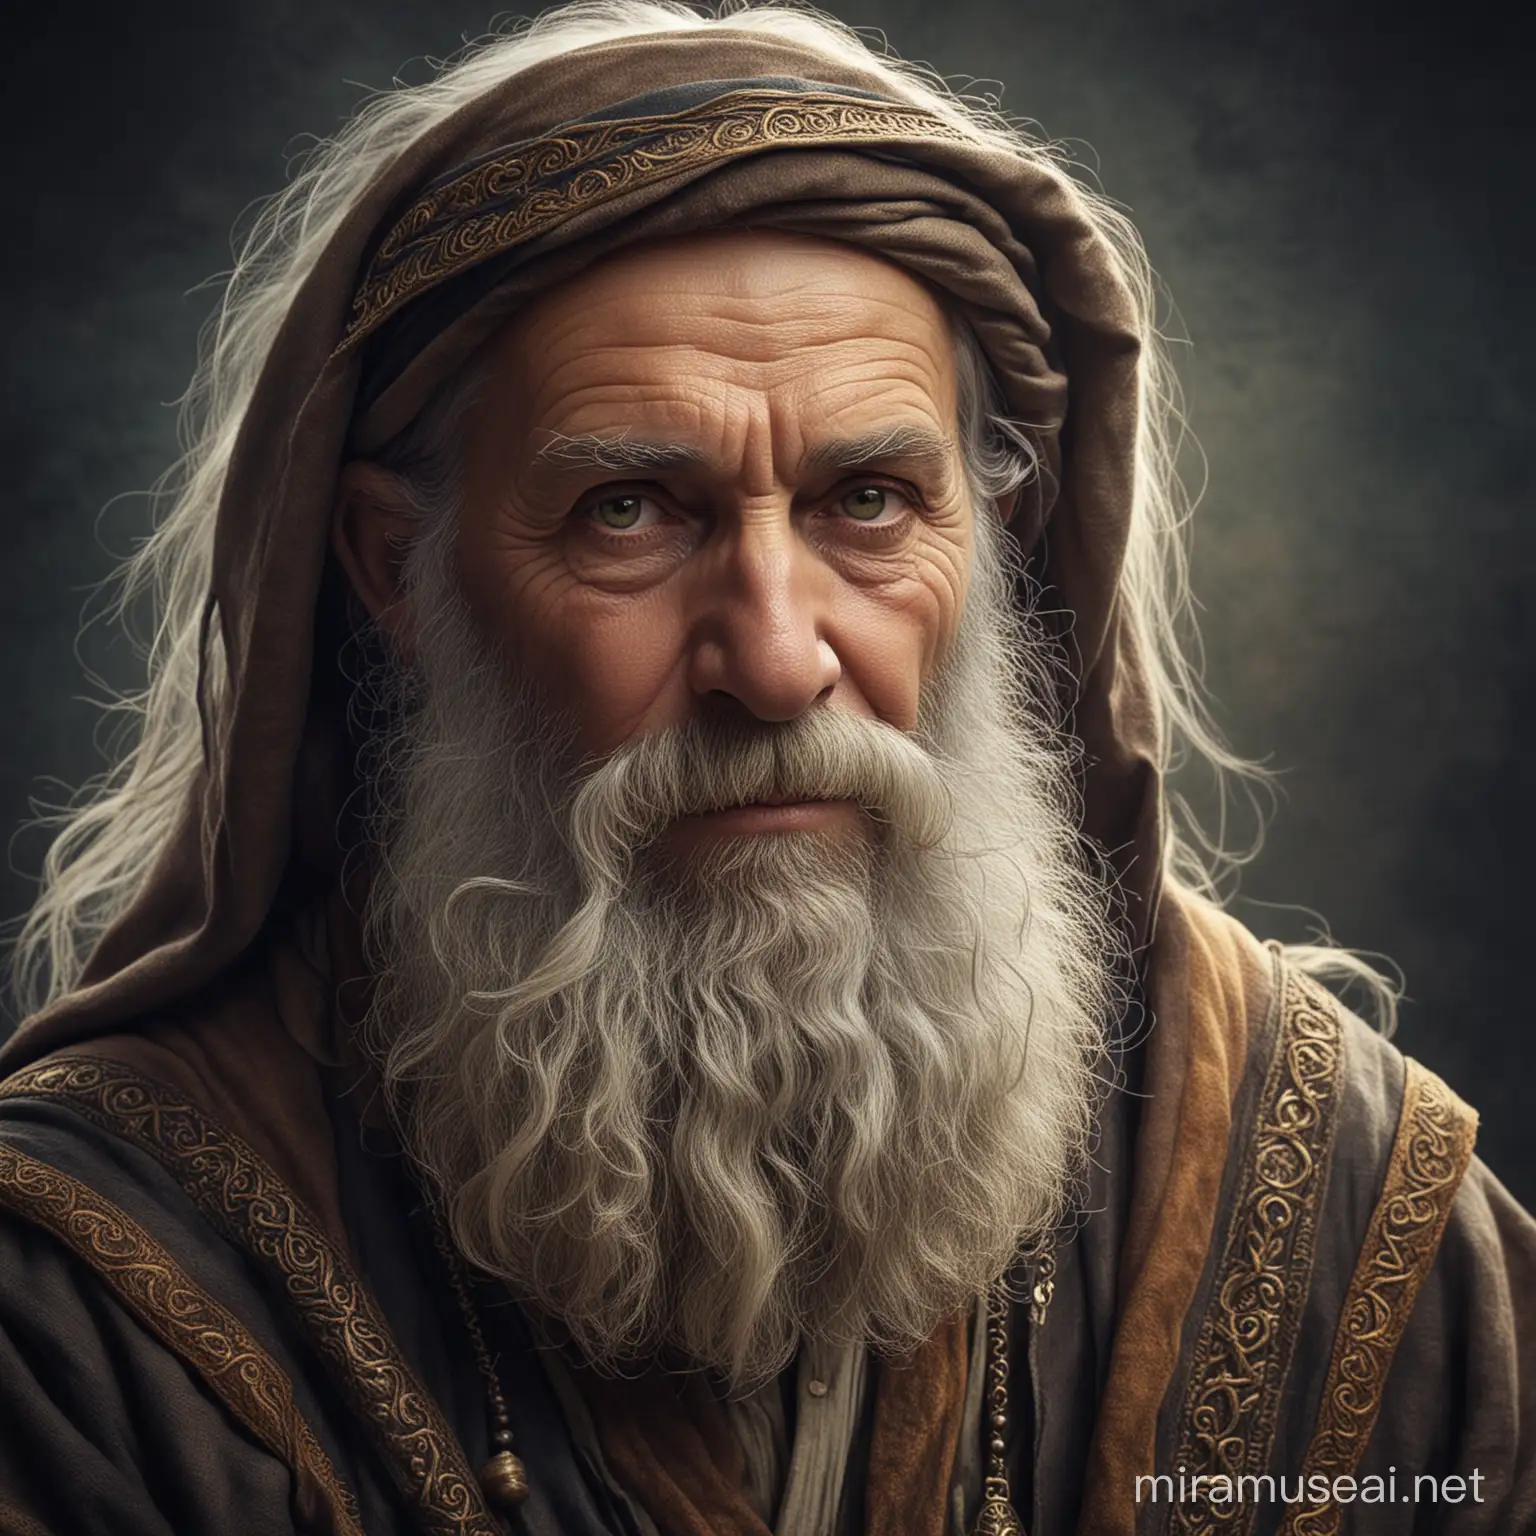 Old wise fantasy-style bearded man